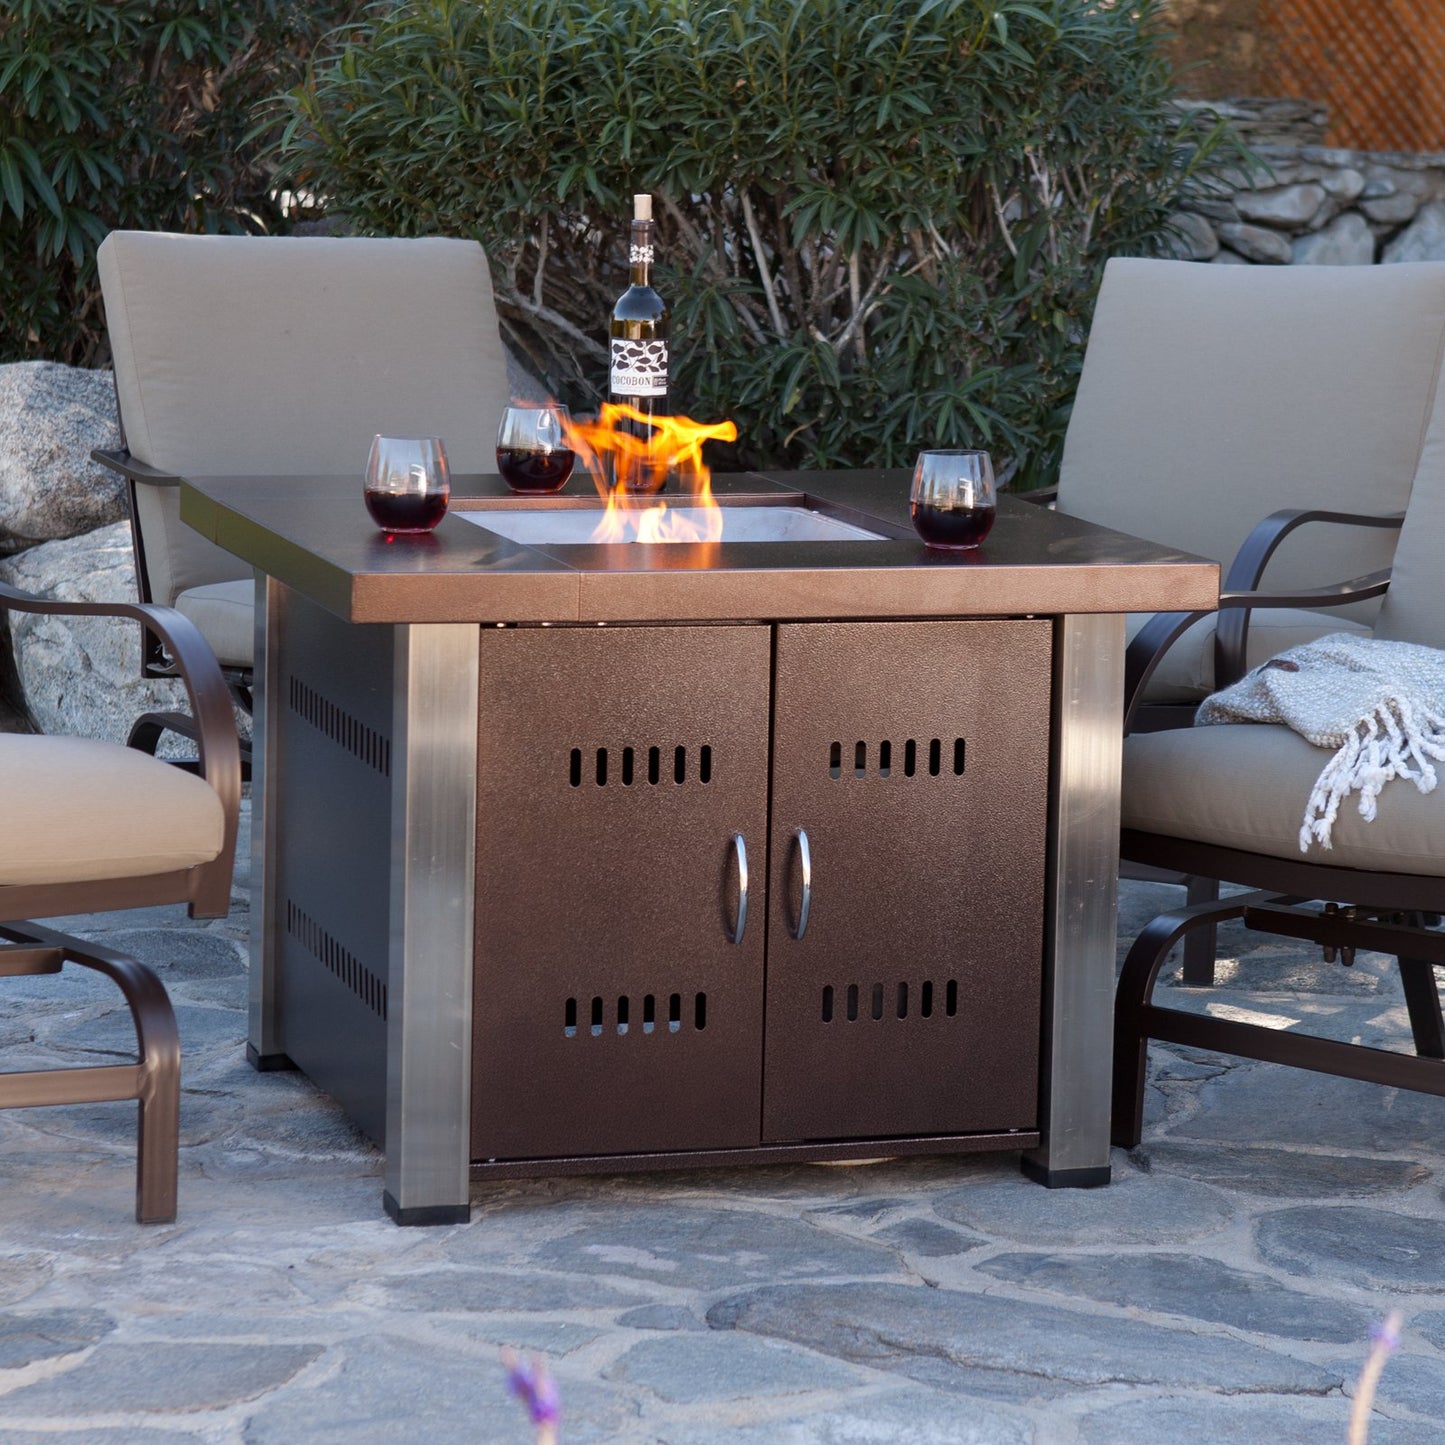 Outdoor Propane Fire Pit With Hammered  Bronze Finish and Stainless Steel Accents